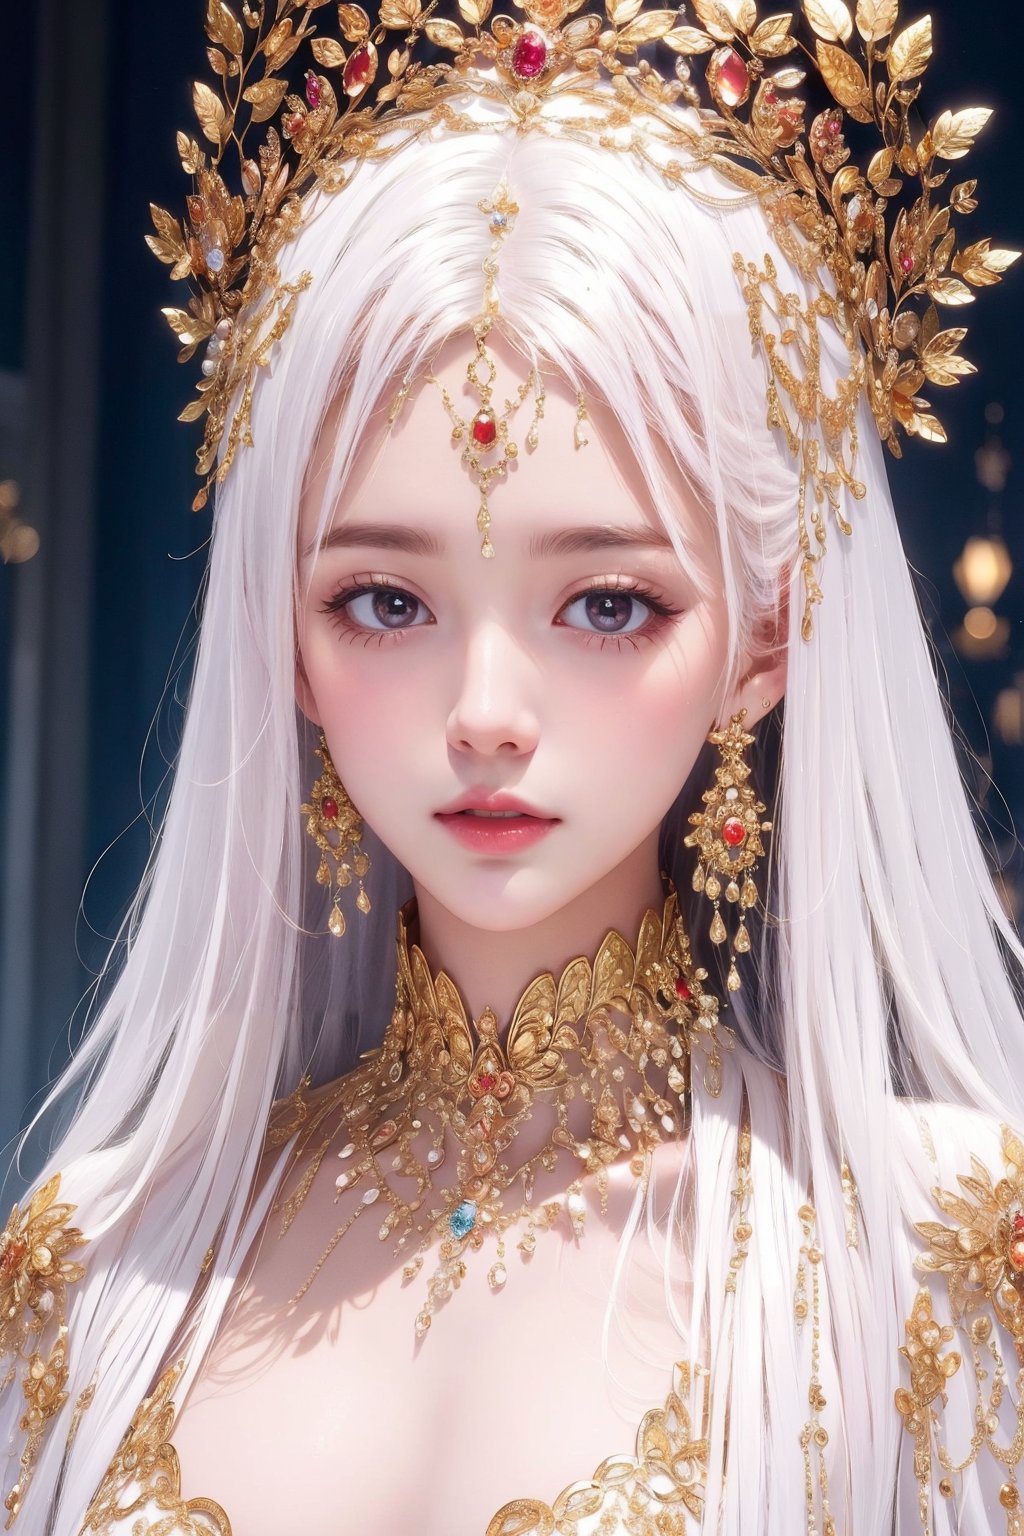 busty and sexy girl, 8k, masterpiece, ultra-realistic, best quality, high resolution, high definition,  The image portrays a person with striking white hair adorned by a golden headpiece and intricate jewelry. The overall aesthetic suggests a blend of regal elegance and fantasy. 